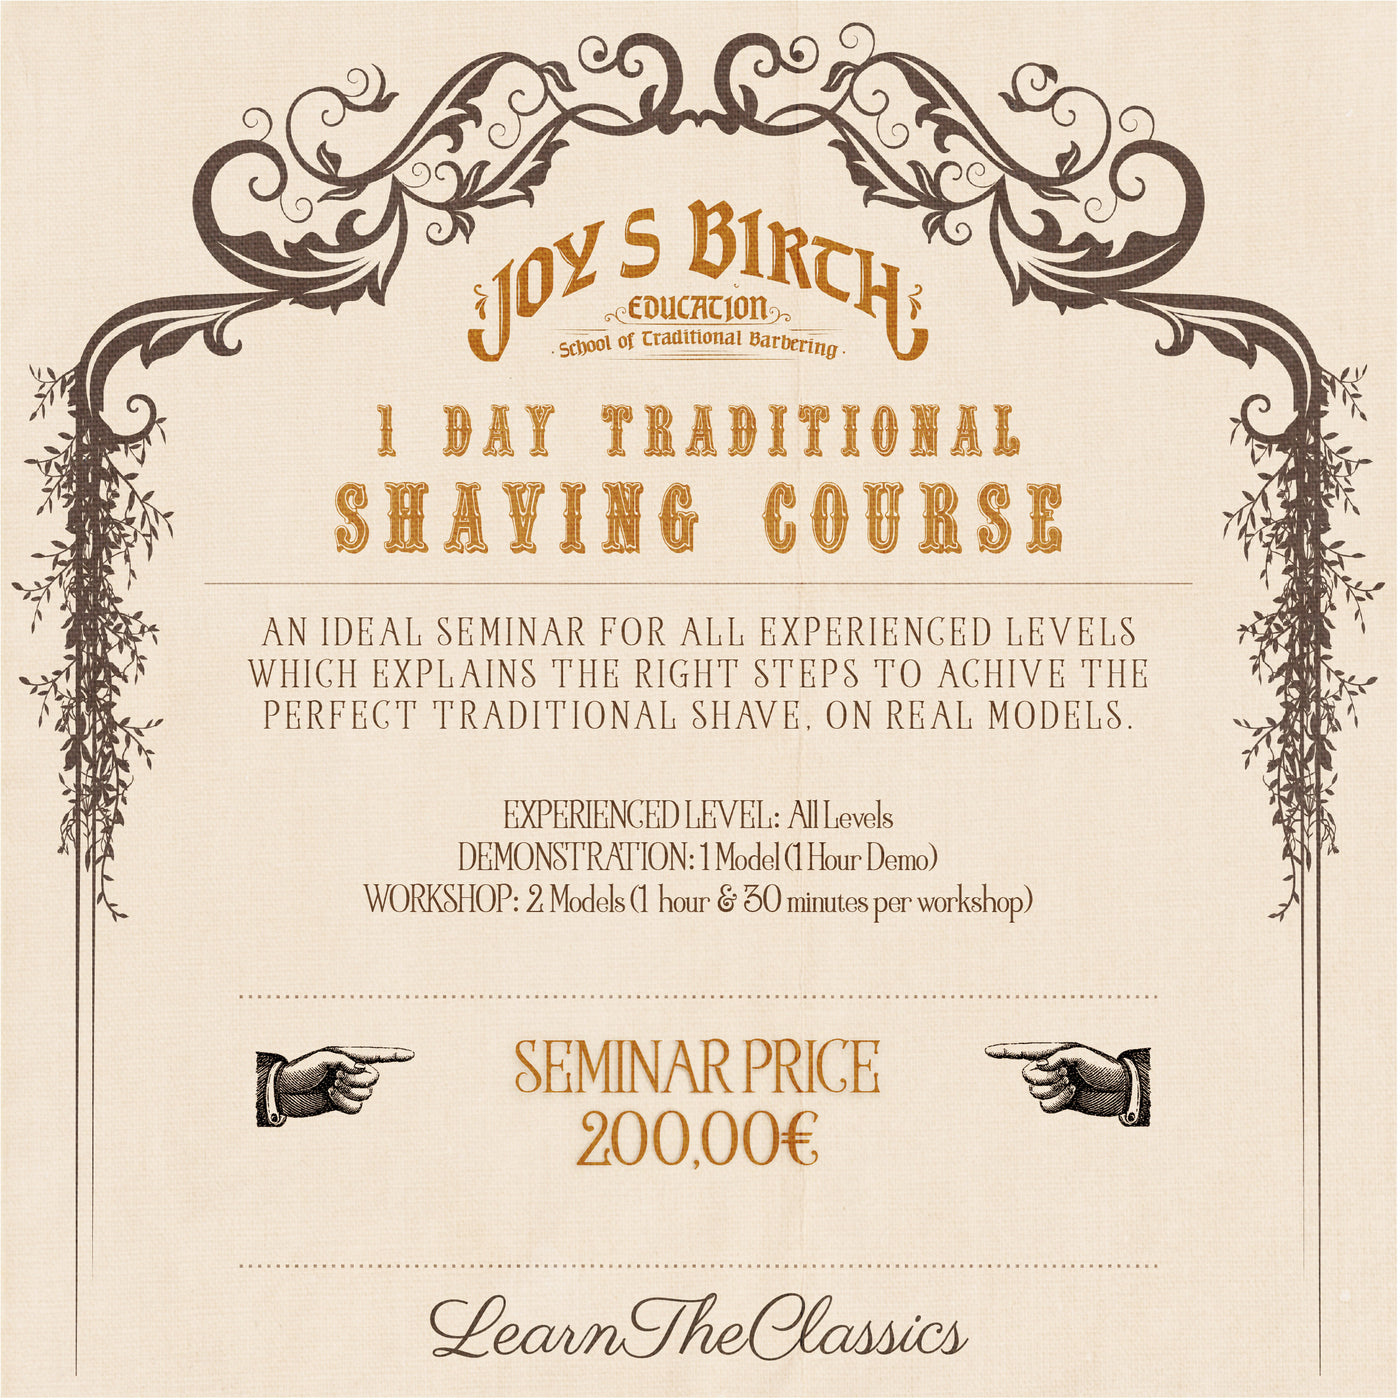 1 DAY - TRADITIONAL SHAVING COURSE